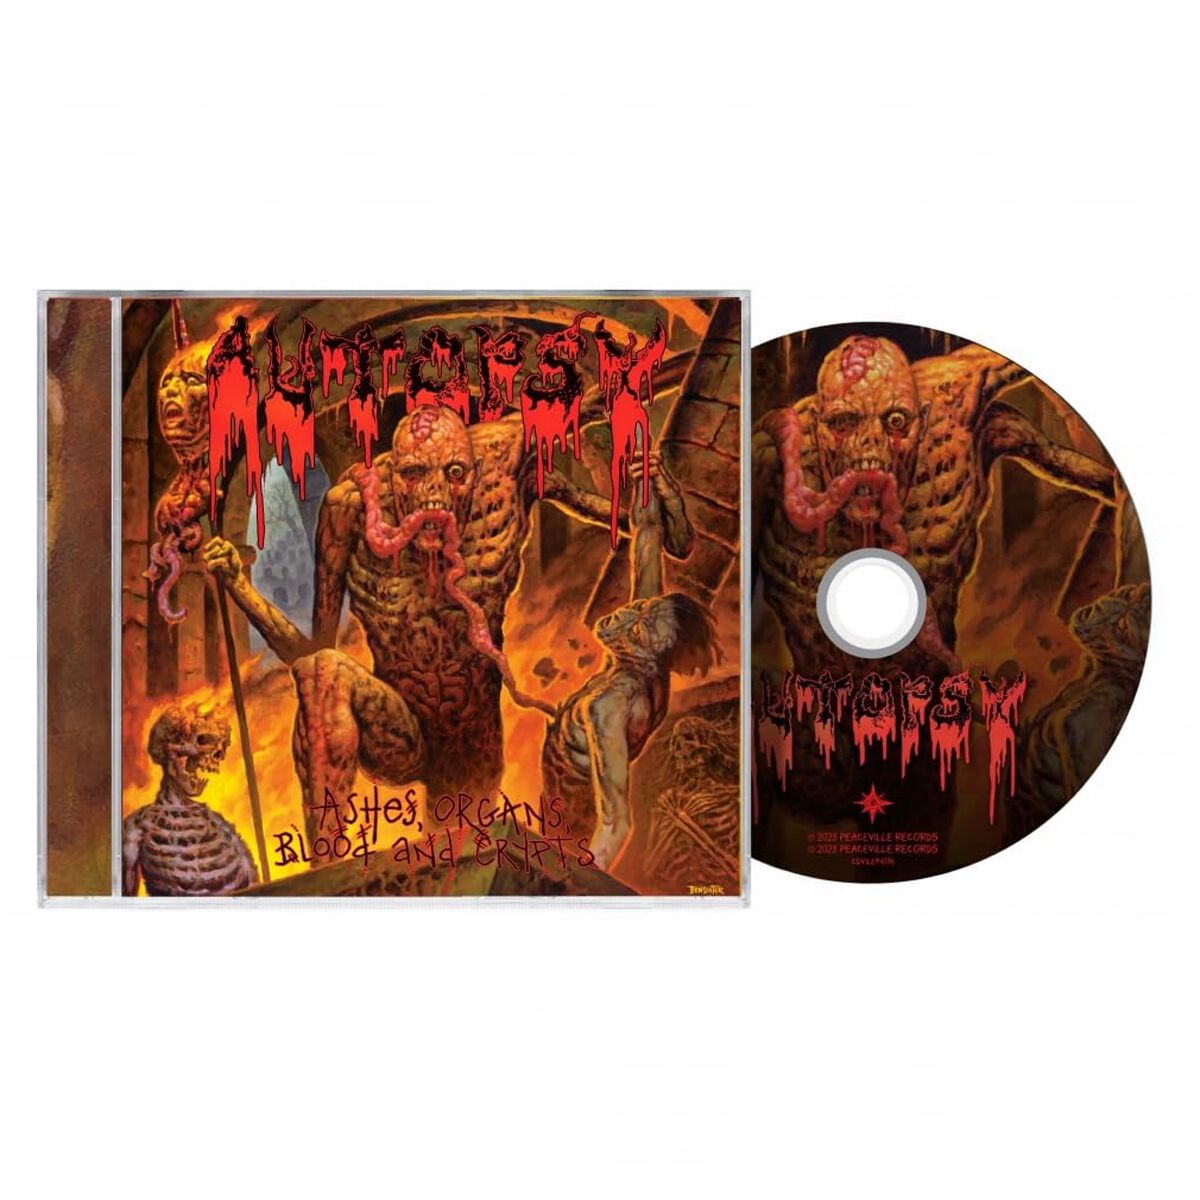 Image of CD di Autopsy - Ashes, organs, blood and crypts - Unisex - standard